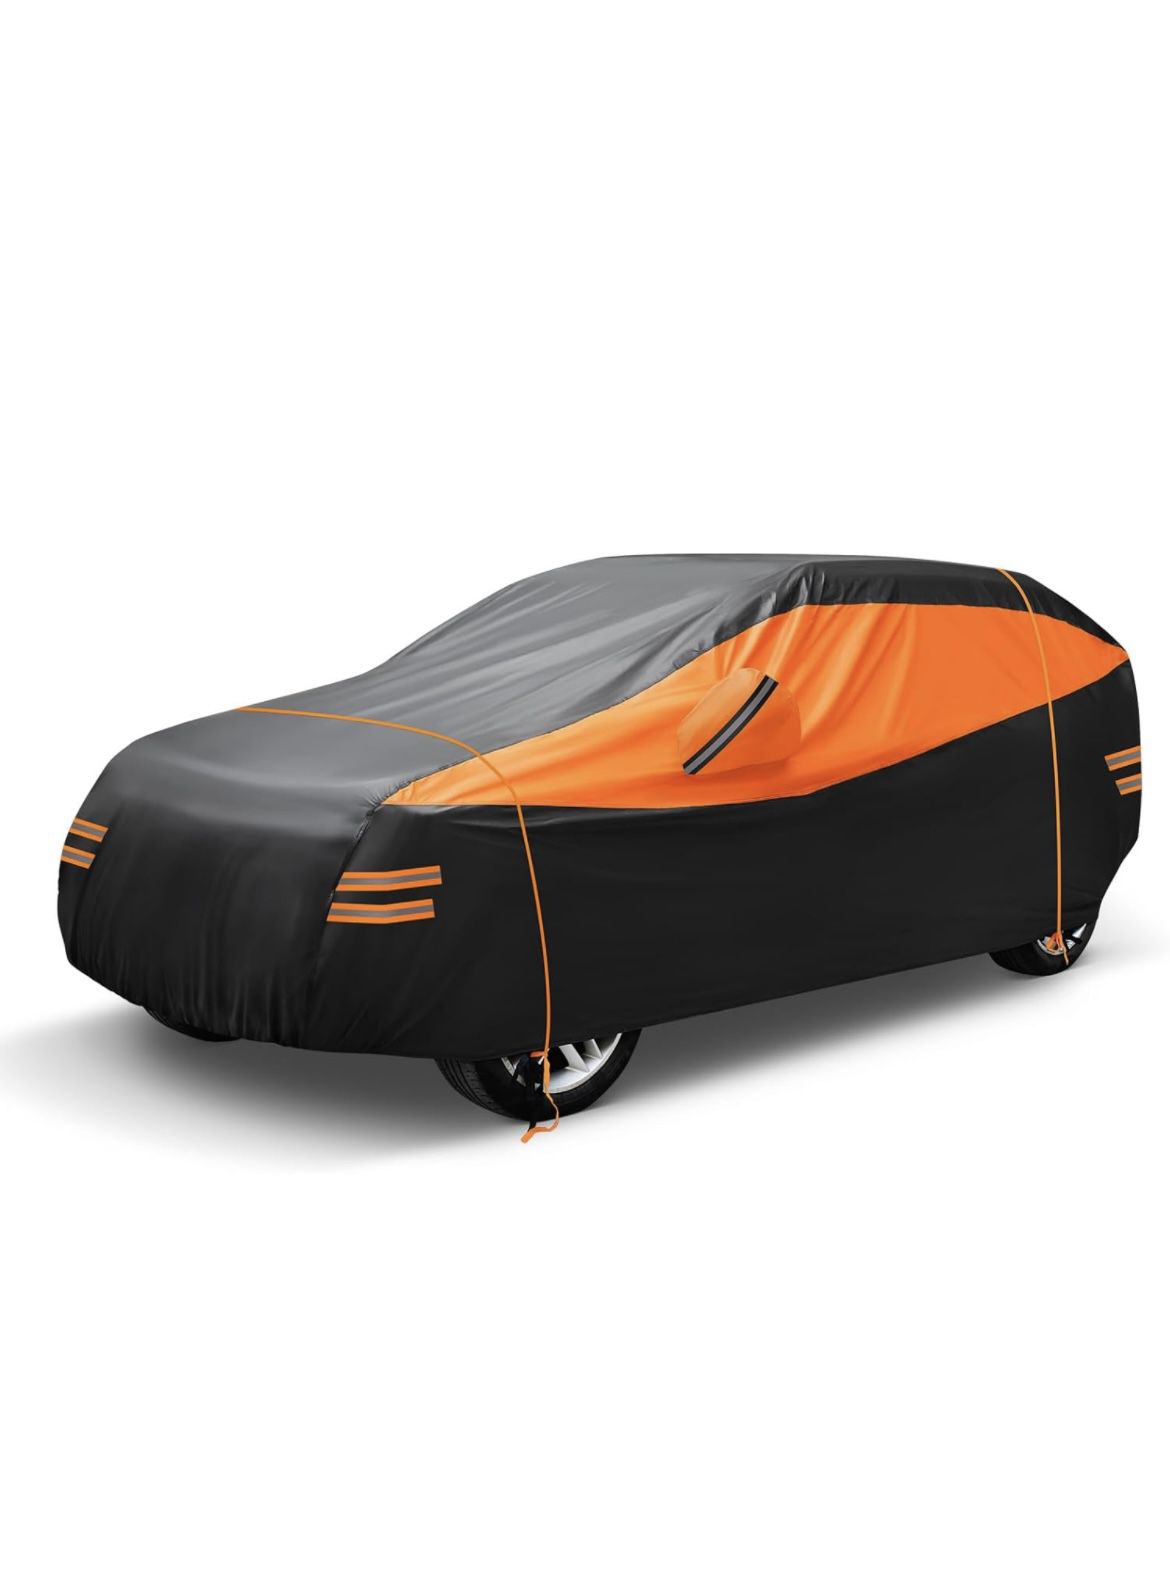 NEW Waterproof SUV All Weather Cover